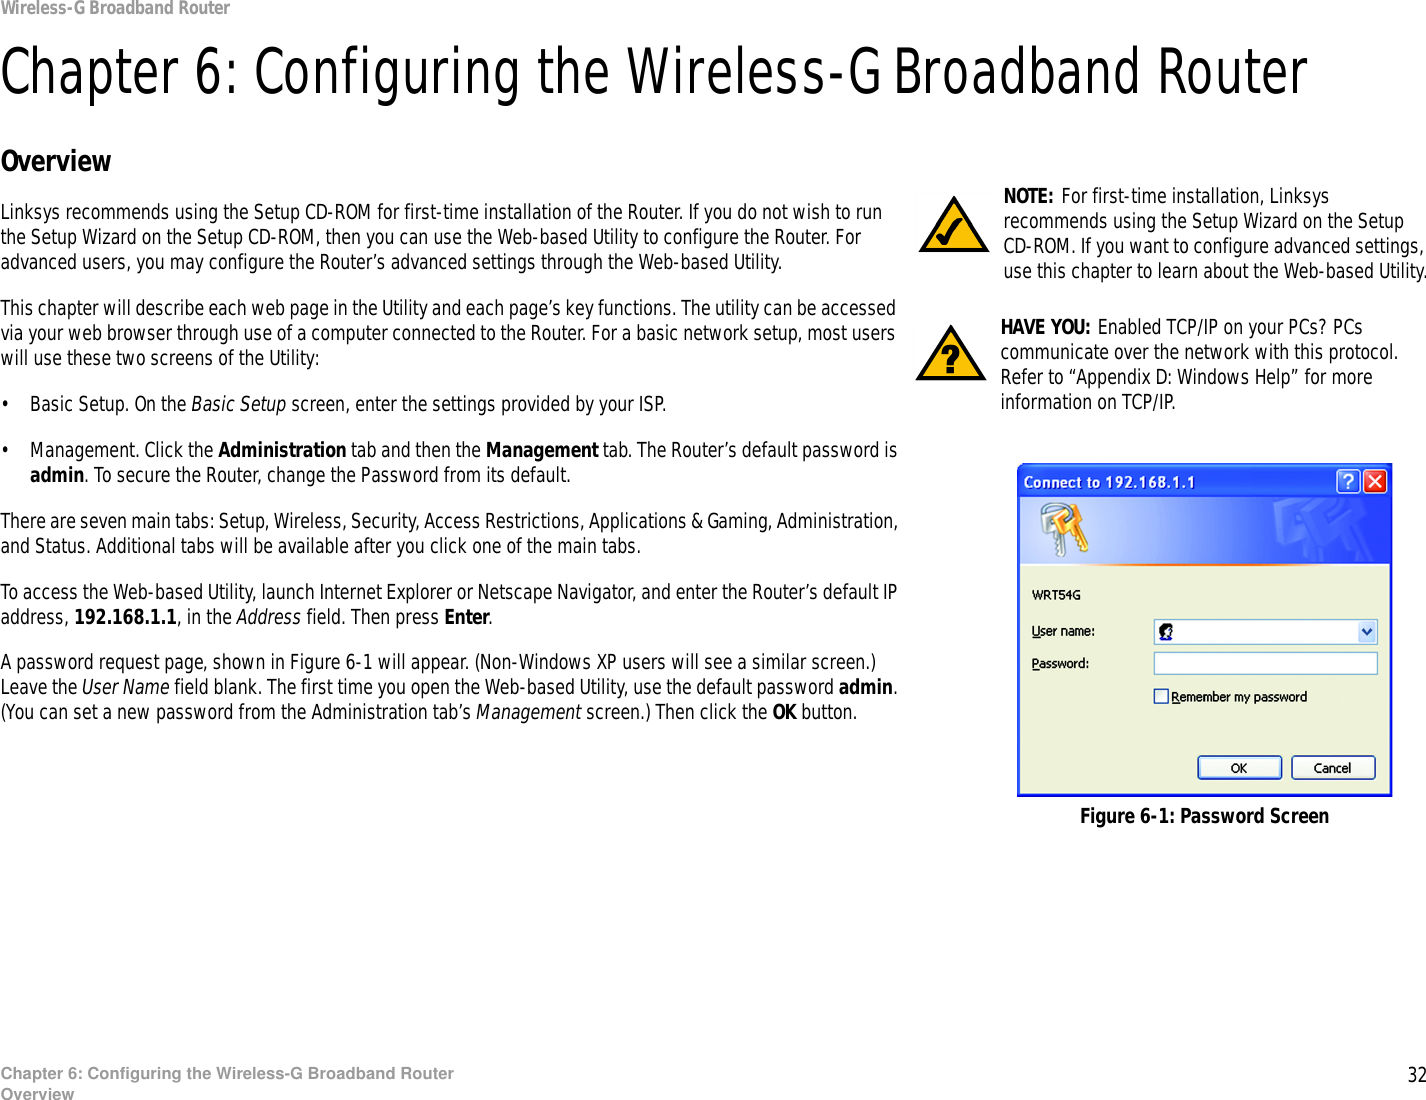 32Chapter 6: Configuring the Wireless-G Broadband RouterOverviewWireless-G Broadband RouterChapter 6: Configuring the Wireless-G Broadband RouterOverviewLinksys recommends using the Setup CD-ROM for first-time installation of the Router. If you do not wish to run the Setup Wizard on the Setup CD-ROM, then you can use the Web-based Utility to configure the Router. For advanced users, you may configure the Router’s advanced settings through the Web-based Utility.This chapter will describe each web page in the Utility and each page’s key functions. The utility can be accessed via your web browser through use of a computer connected to the Router. For a basic network setup, most users will use these two screens of the Utility:• Basic Setup. On the Basic Setup screen, enter the settings provided by your ISP.• Management. Click the Administration tab and then the Management tab. The Router’s default password is admin. To secure the Router, change the Password from its default.There are seven main tabs: Setup, Wireless, Security, Access Restrictions, Applications &amp; Gaming, Administration, and Status. Additional tabs will be available after you click one of the main tabs.To access the Web-based Utility, launch Internet Explorer or Netscape Navigator, and enter the Router’s default IP address, 192.168.1.1, in the Address field. Then press Enter. A password request page, shown in Figure 6-1 will appear. (Non-Windows XP users will see a similar screen.) Leave the User Name field blank. The first time you open the Web-based Utility, use the default password admin. (You can set a new password from the Administration tab’s Management screen.) Then click the OK button. HAVE YOU: Enabled TCP/IP on your PCs? PCs communicate over the network with this protocol. Refer to “Appendix D: Windows Help” for more information on TCP/IP.NOTE: For first-time installation, Linksys recommends using the Setup Wizard on the Setup CD-ROM. If you want to configure advanced settings, use this chapter to learn about the Web-based Utility.Figure 6-1: Password Screen